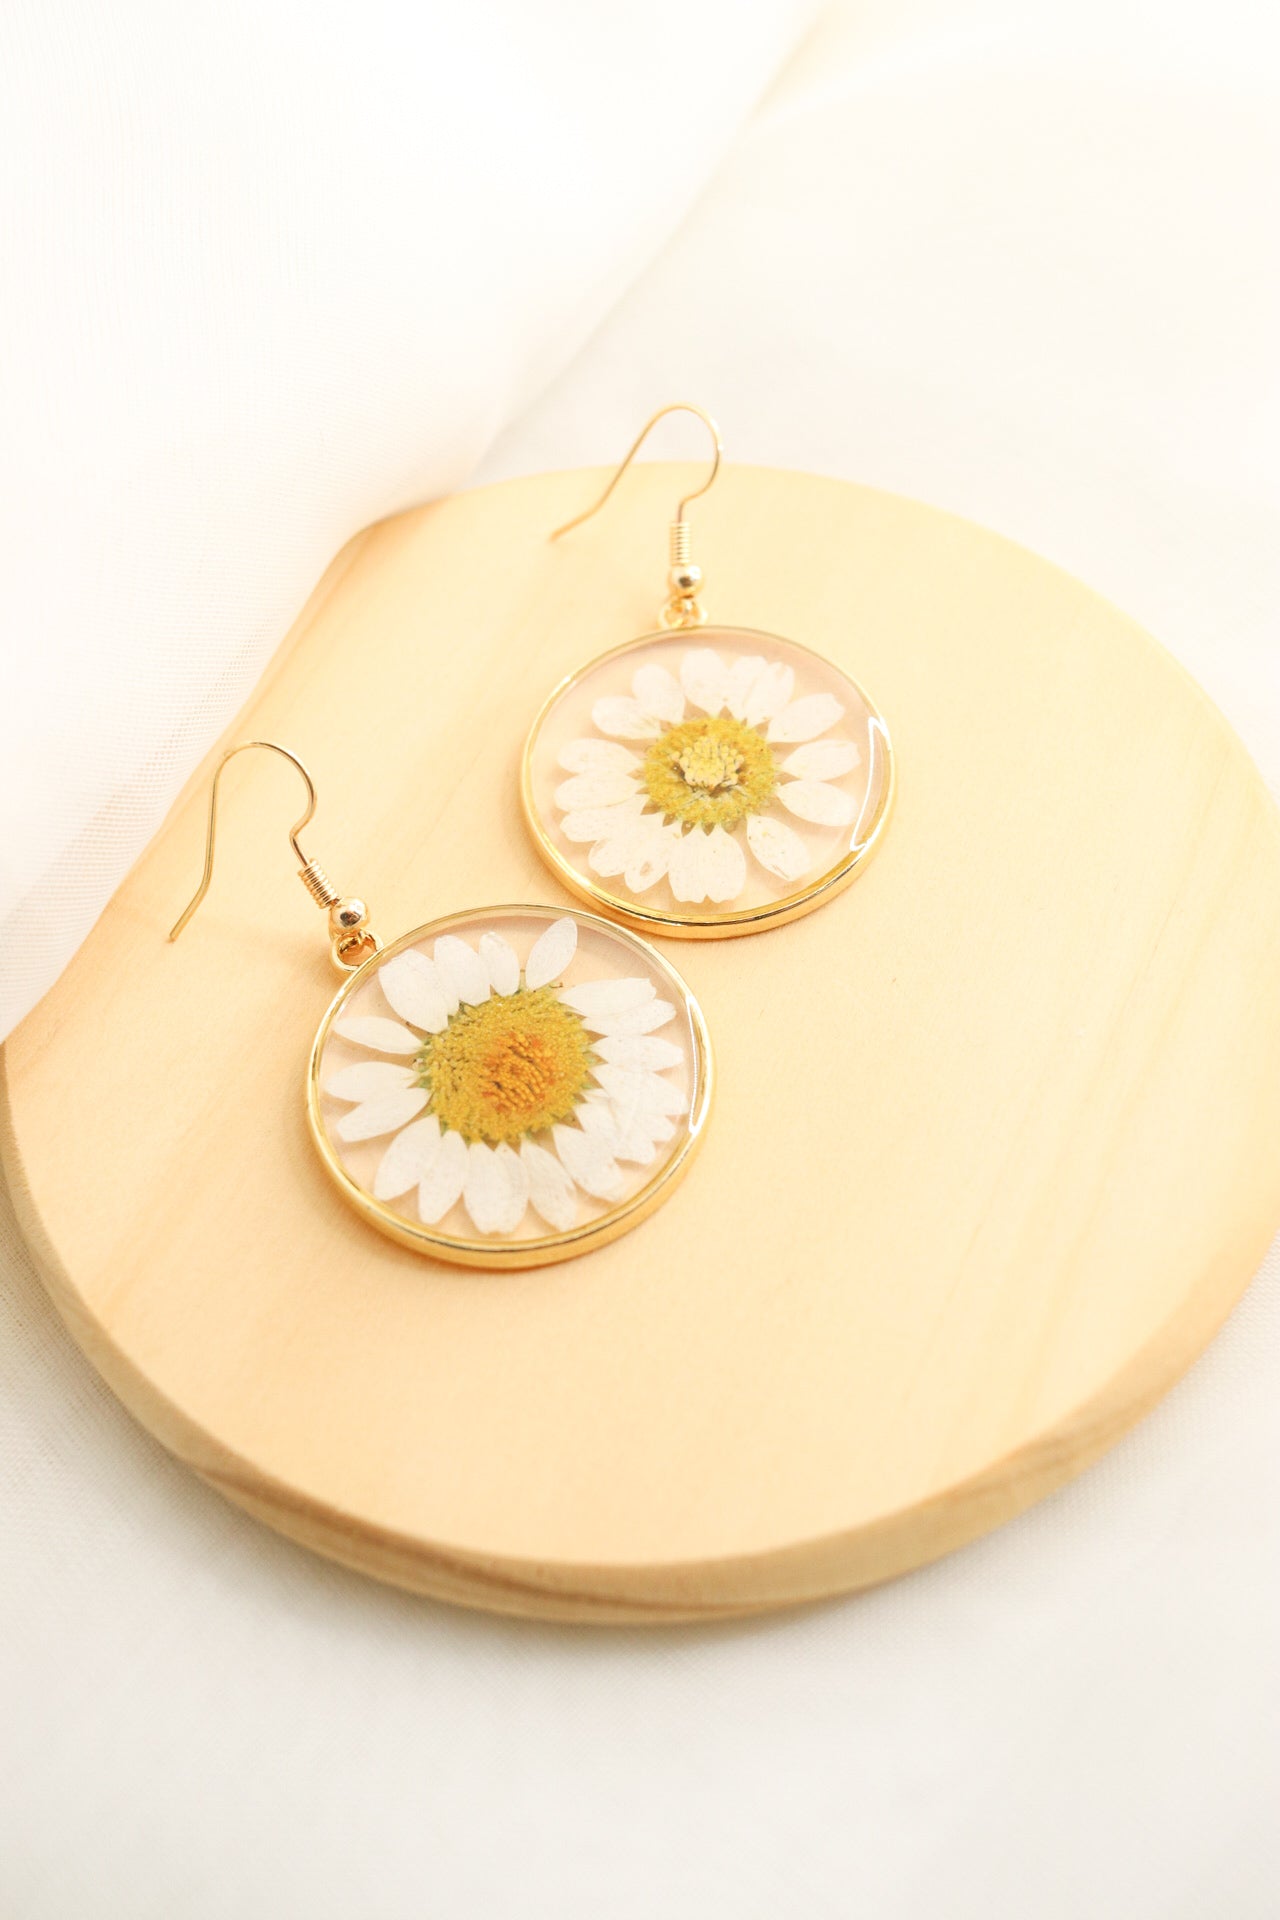 White Daisy Wildflower Earrings, Real Natural Pressed Flower Resin Earring, Botanical Nature Jewelry, Nature Lover Gift For Her